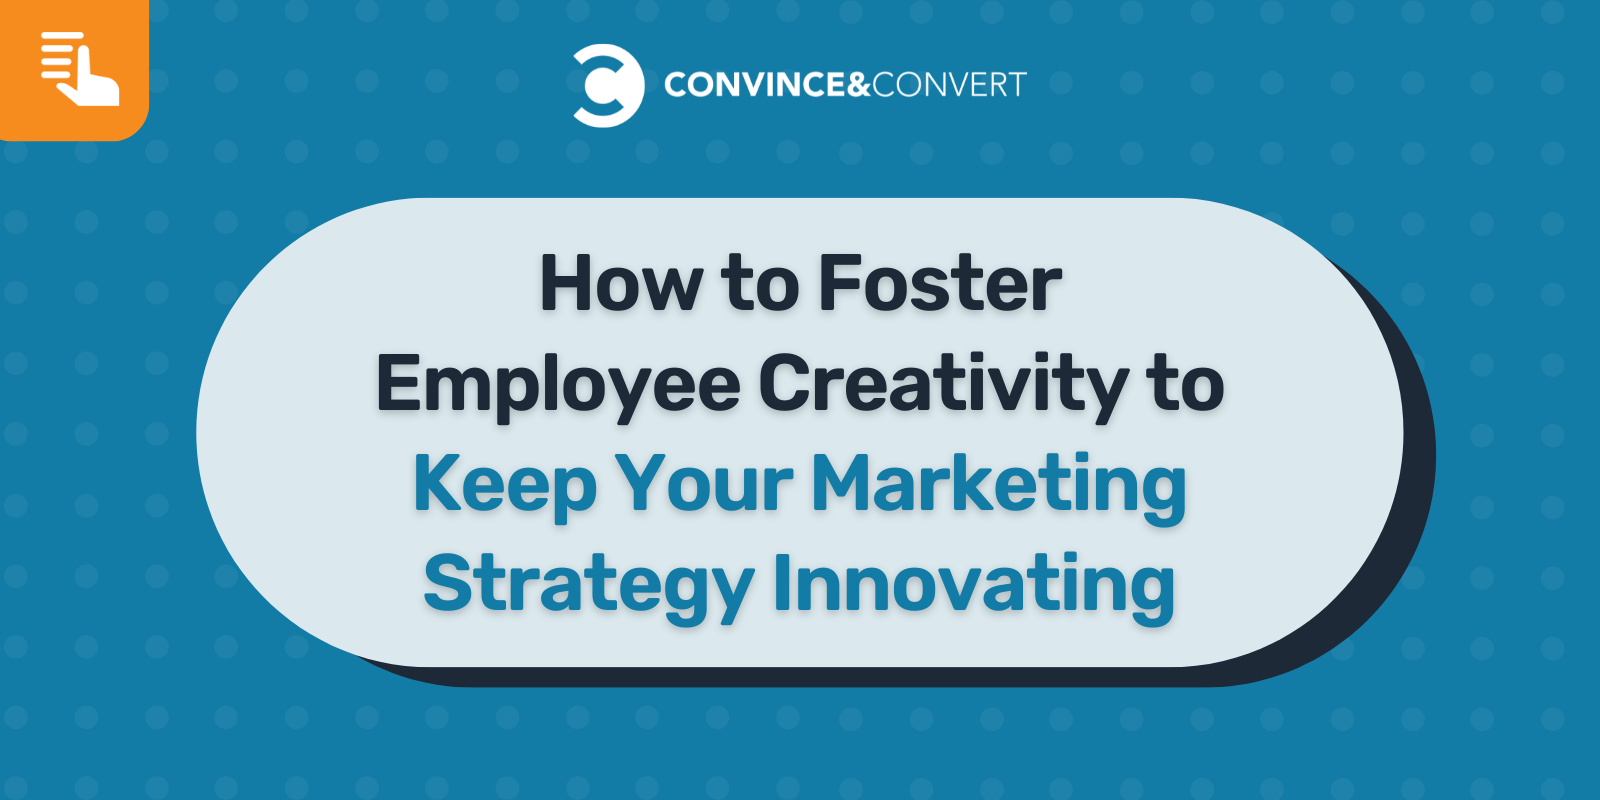 How to Foster Employee Creativity to Keep Your Marketing Strategy Innovating